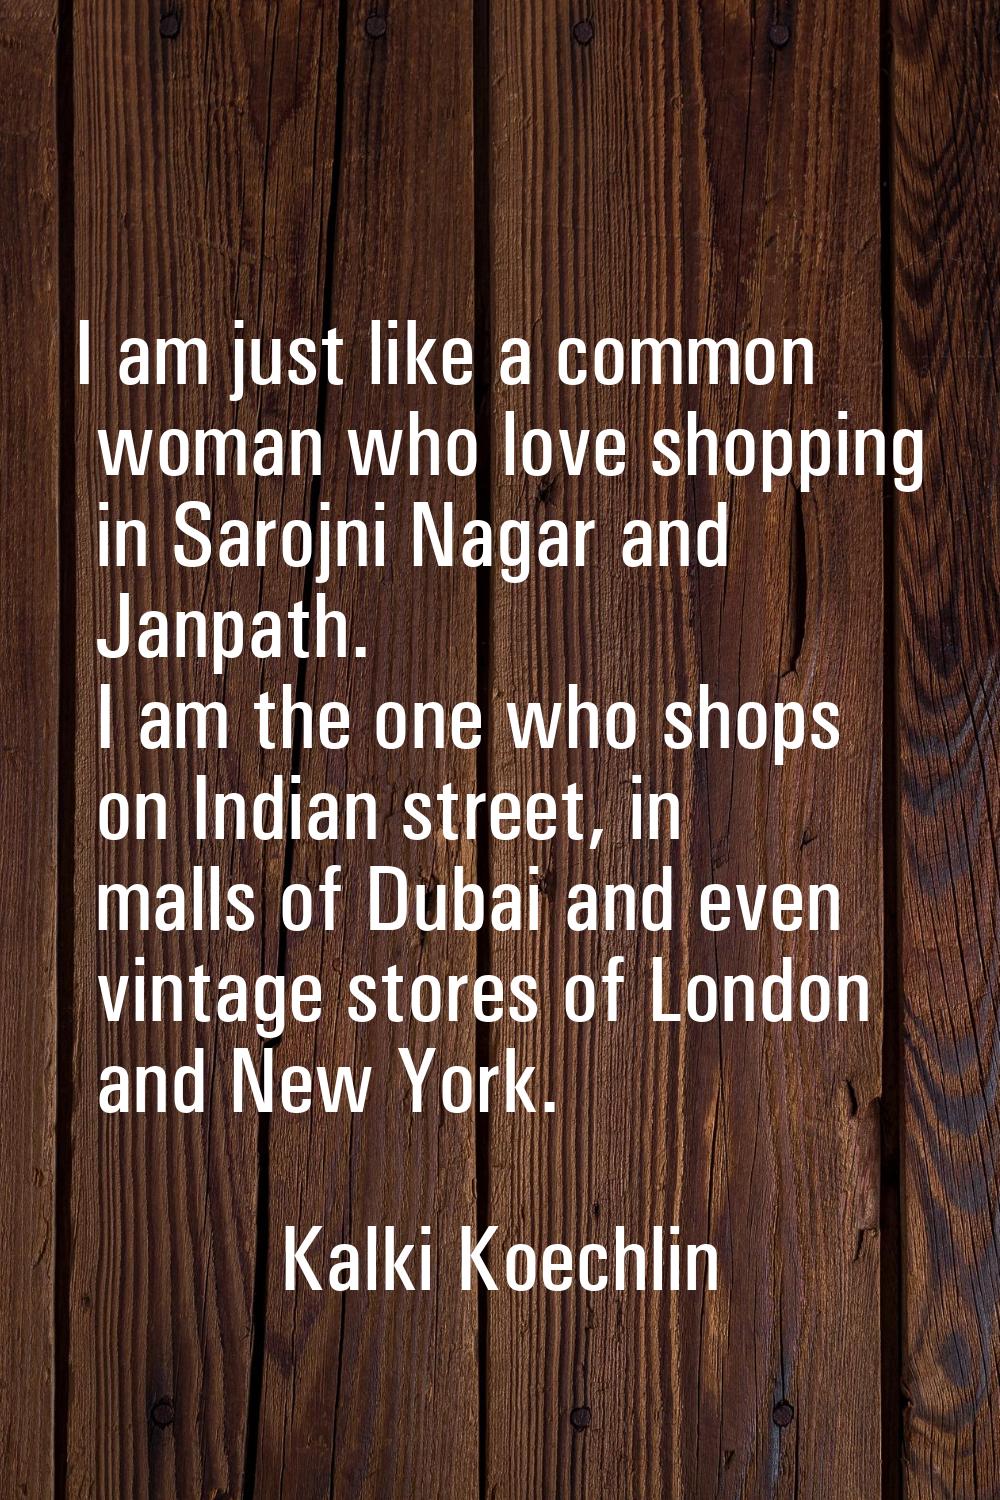 I am just like a common woman who love shopping in Sarojni Nagar and Janpath. I am the one who shop